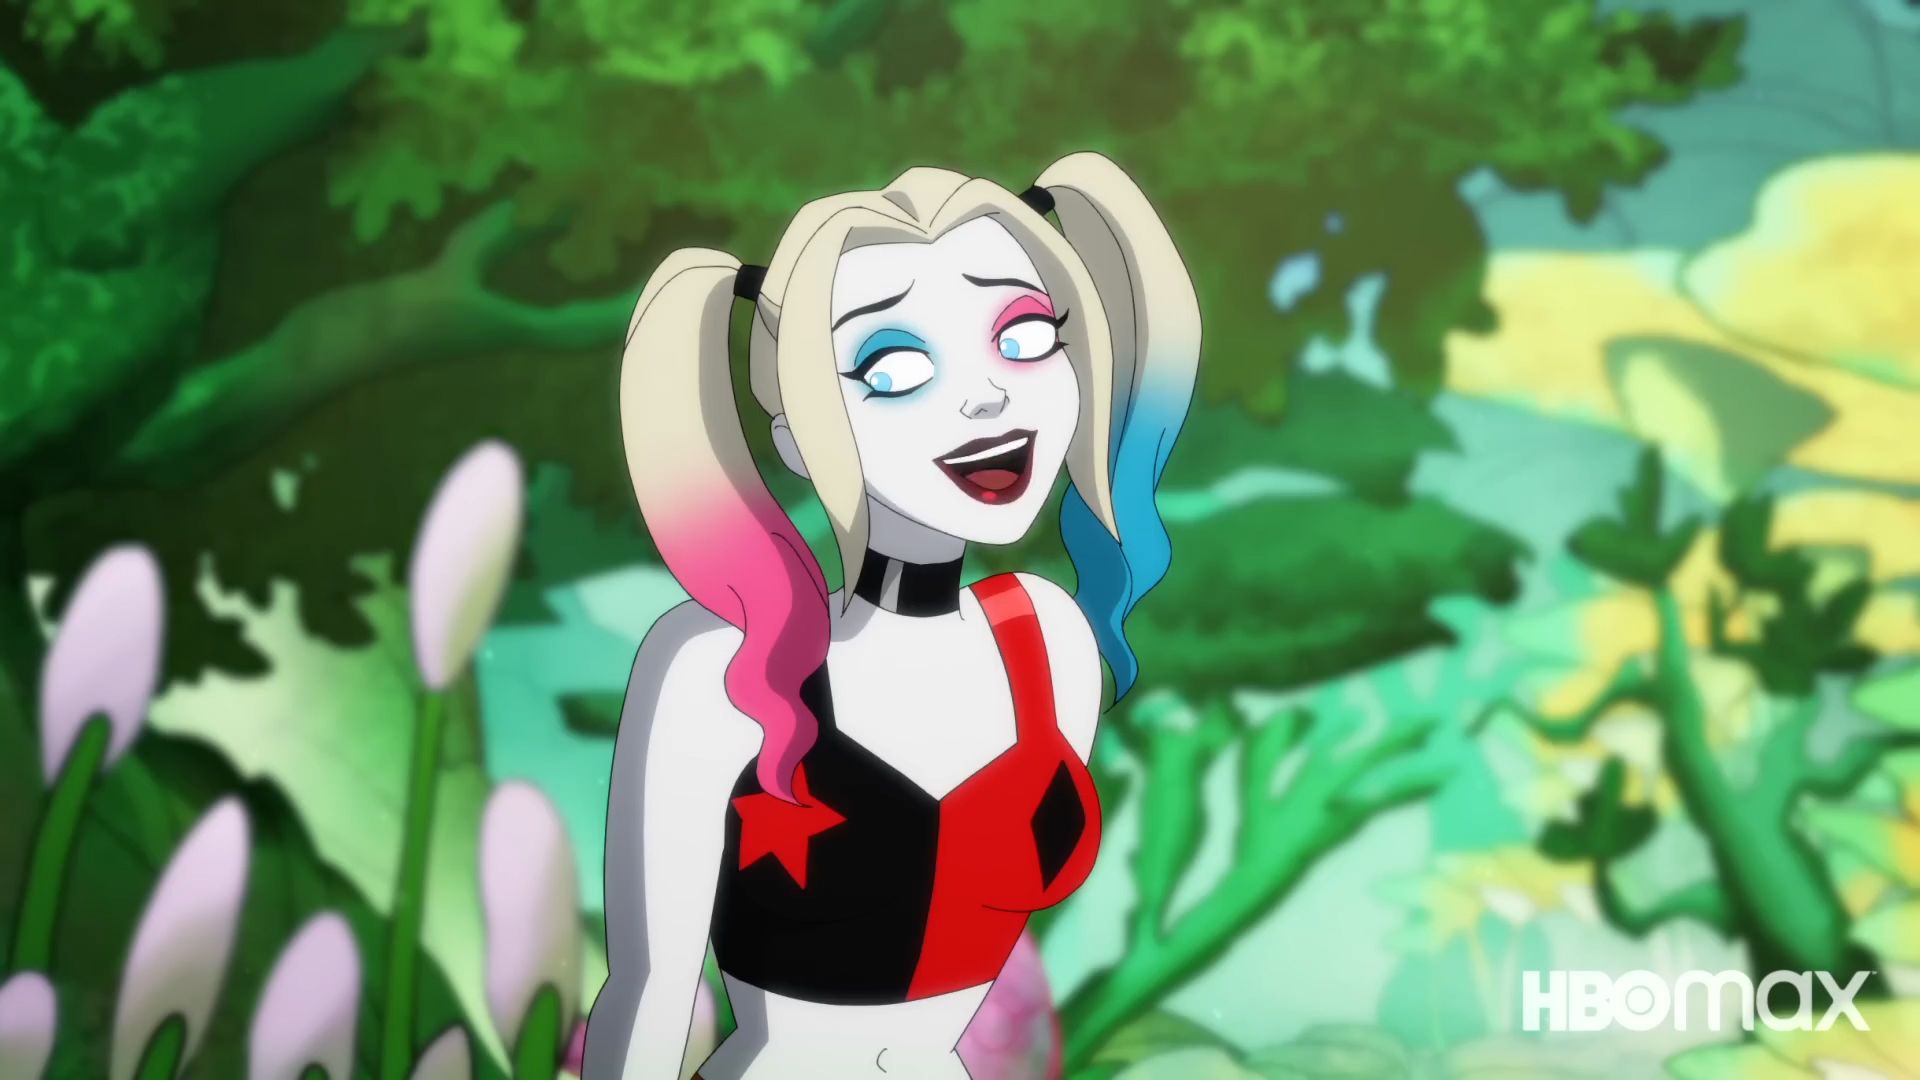 Kaley Cuoco's Harley Quinn has future revealed after season 3